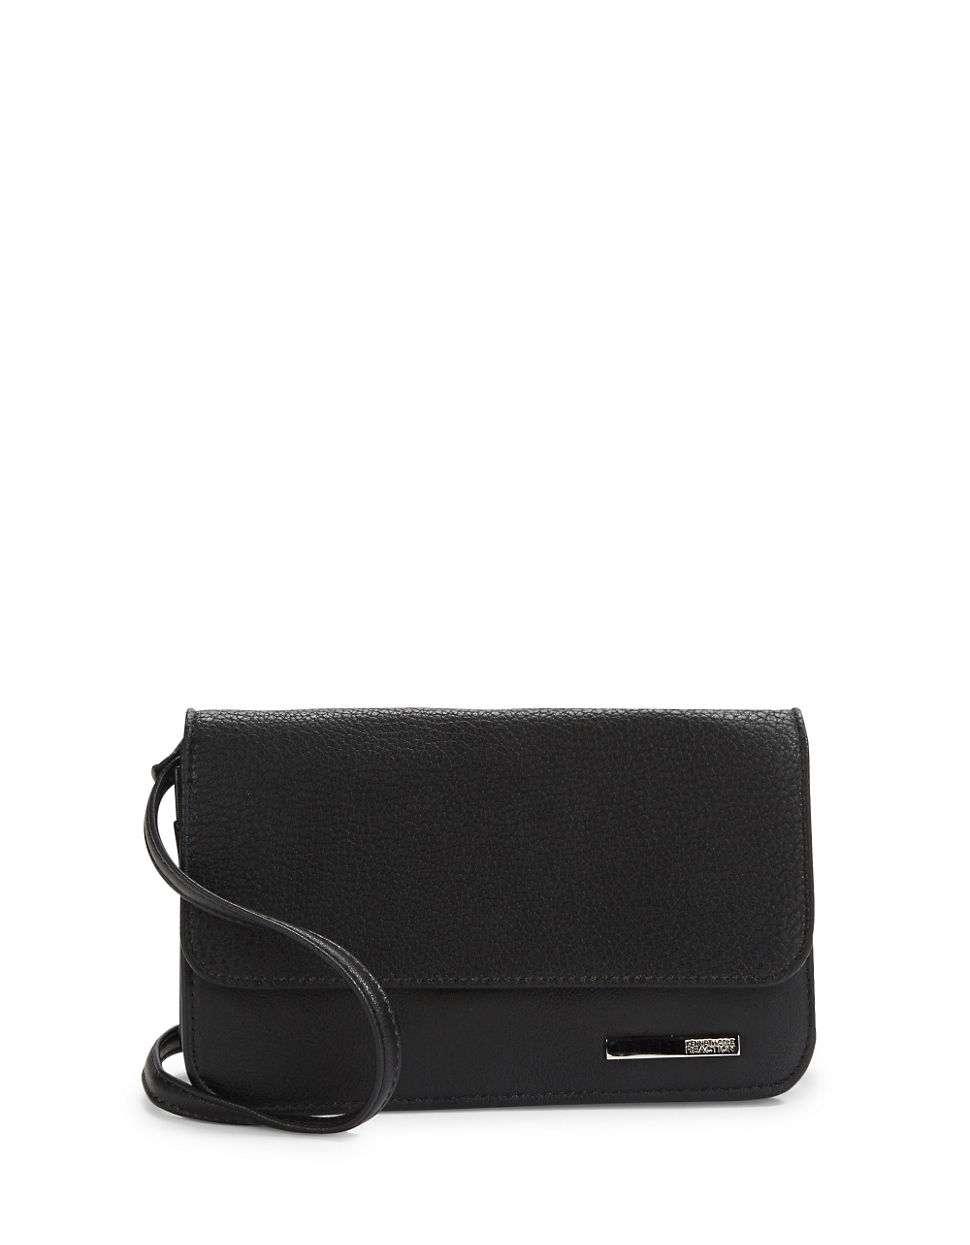 Kenneth Cole Reaction Leather Foldover Crossbody Bag in Black - Lyst